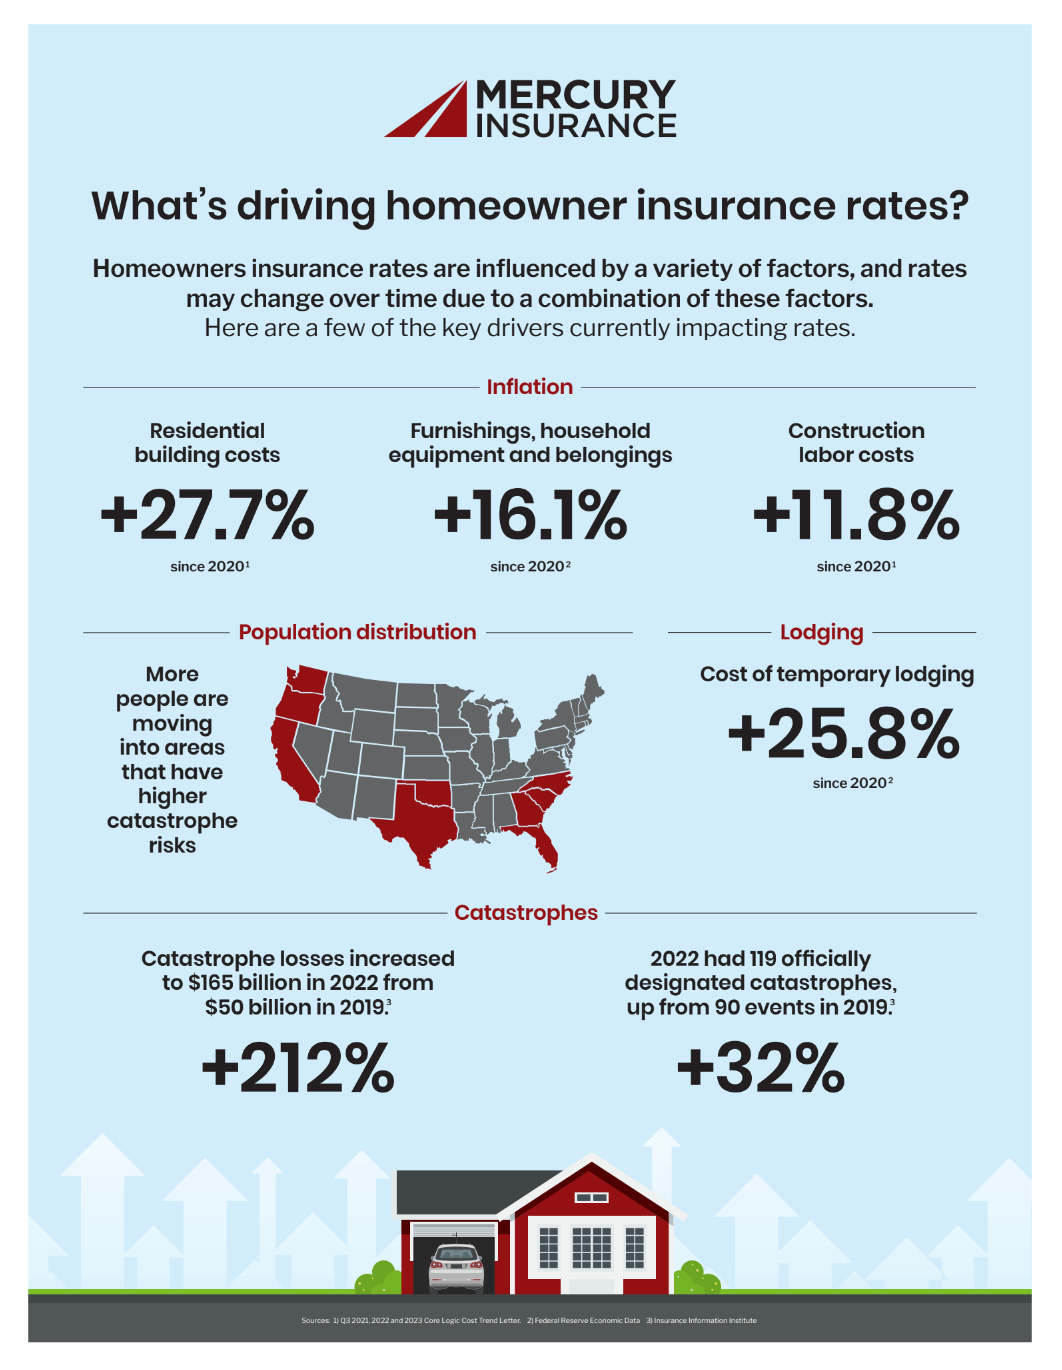 Infographic showing the top factors that are increasing homeowners insurance rates